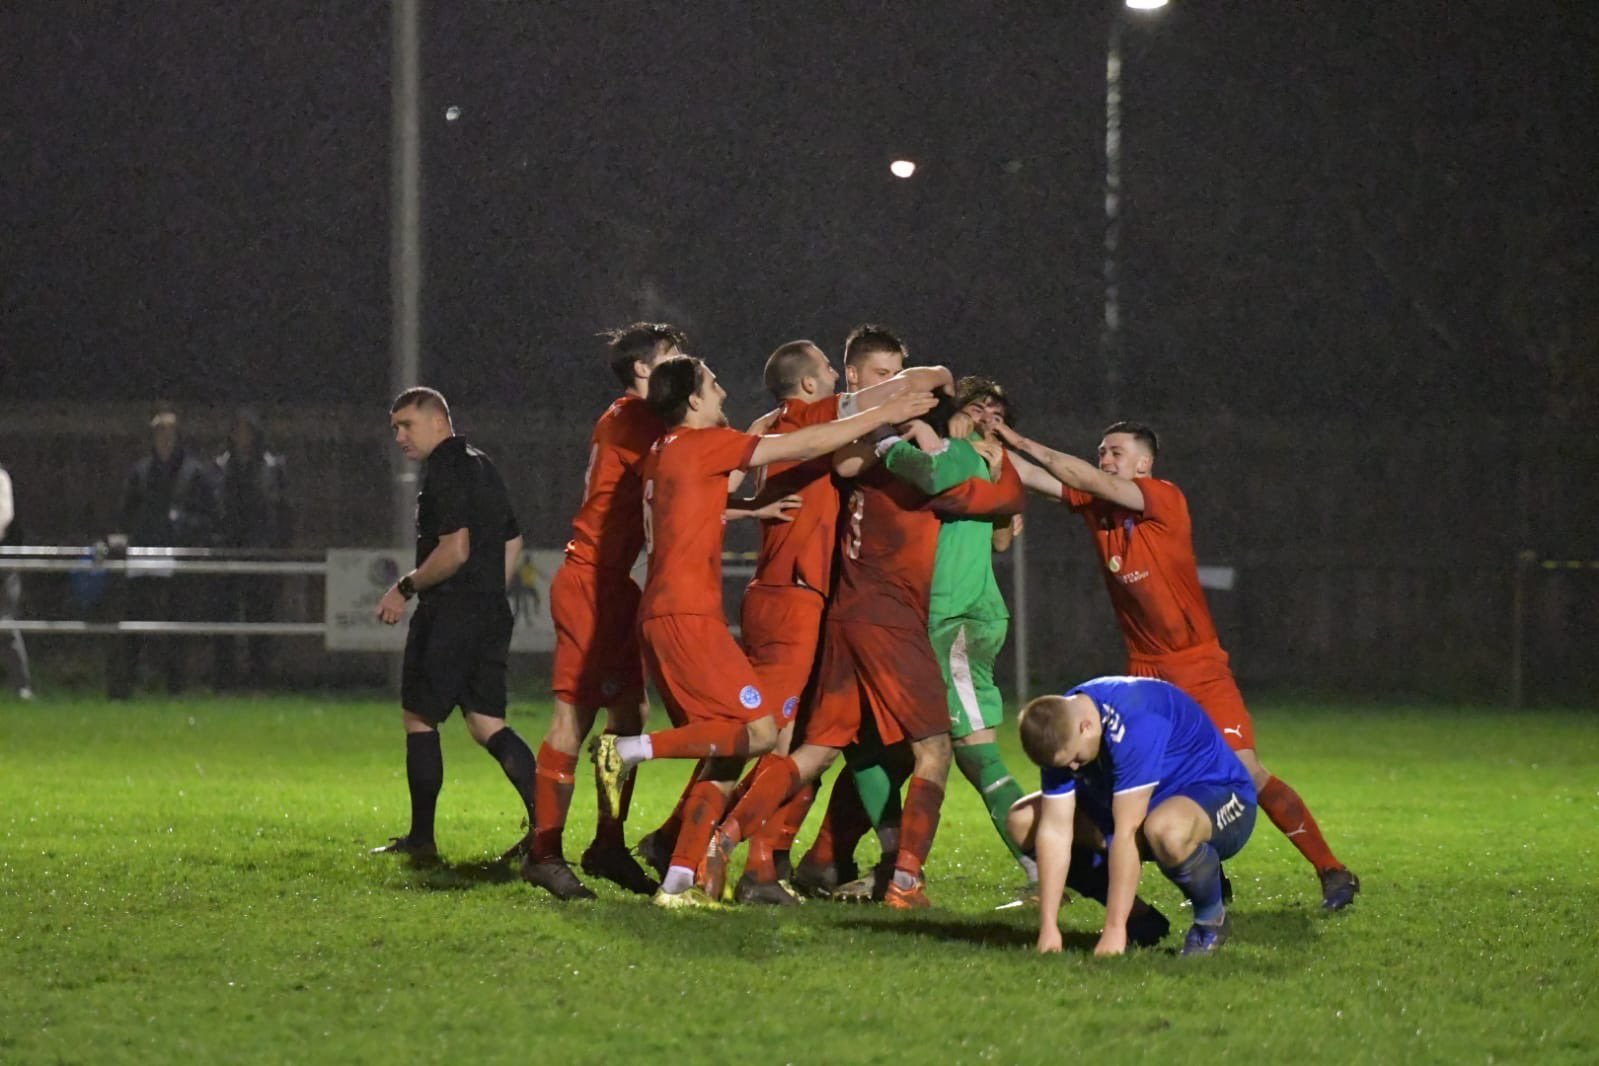 Keeper Graeme McCall is mobbed after saving the decisive penalty in the FA Vase penalty shoot-out win at Jarrow. Picture by Mark Percy